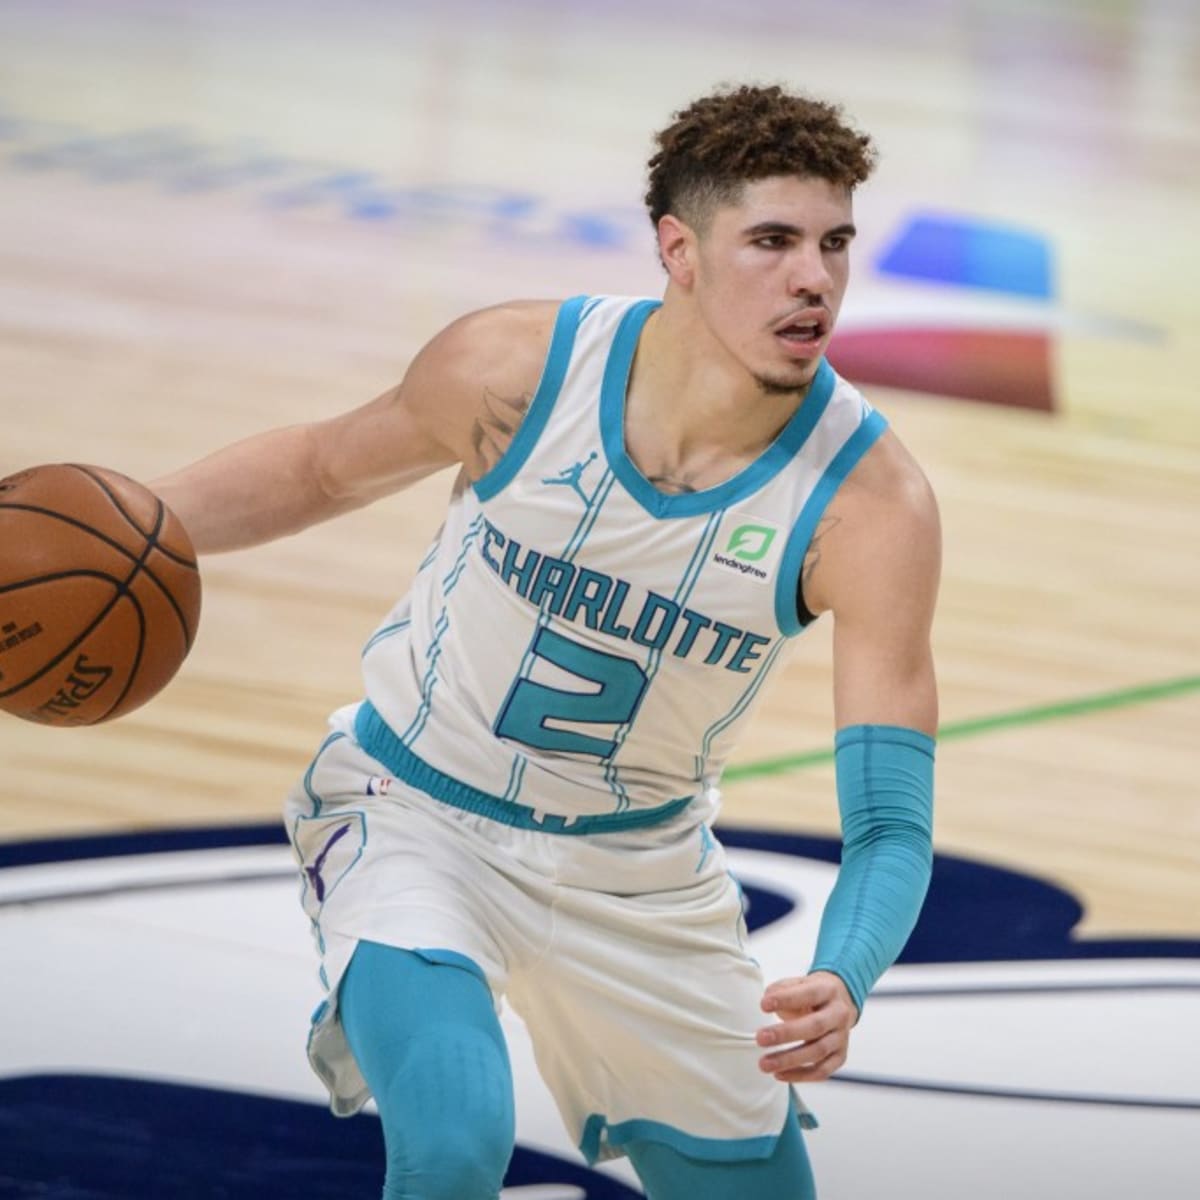 LaMelo Ball to Officially Change Jersey Number - Sports